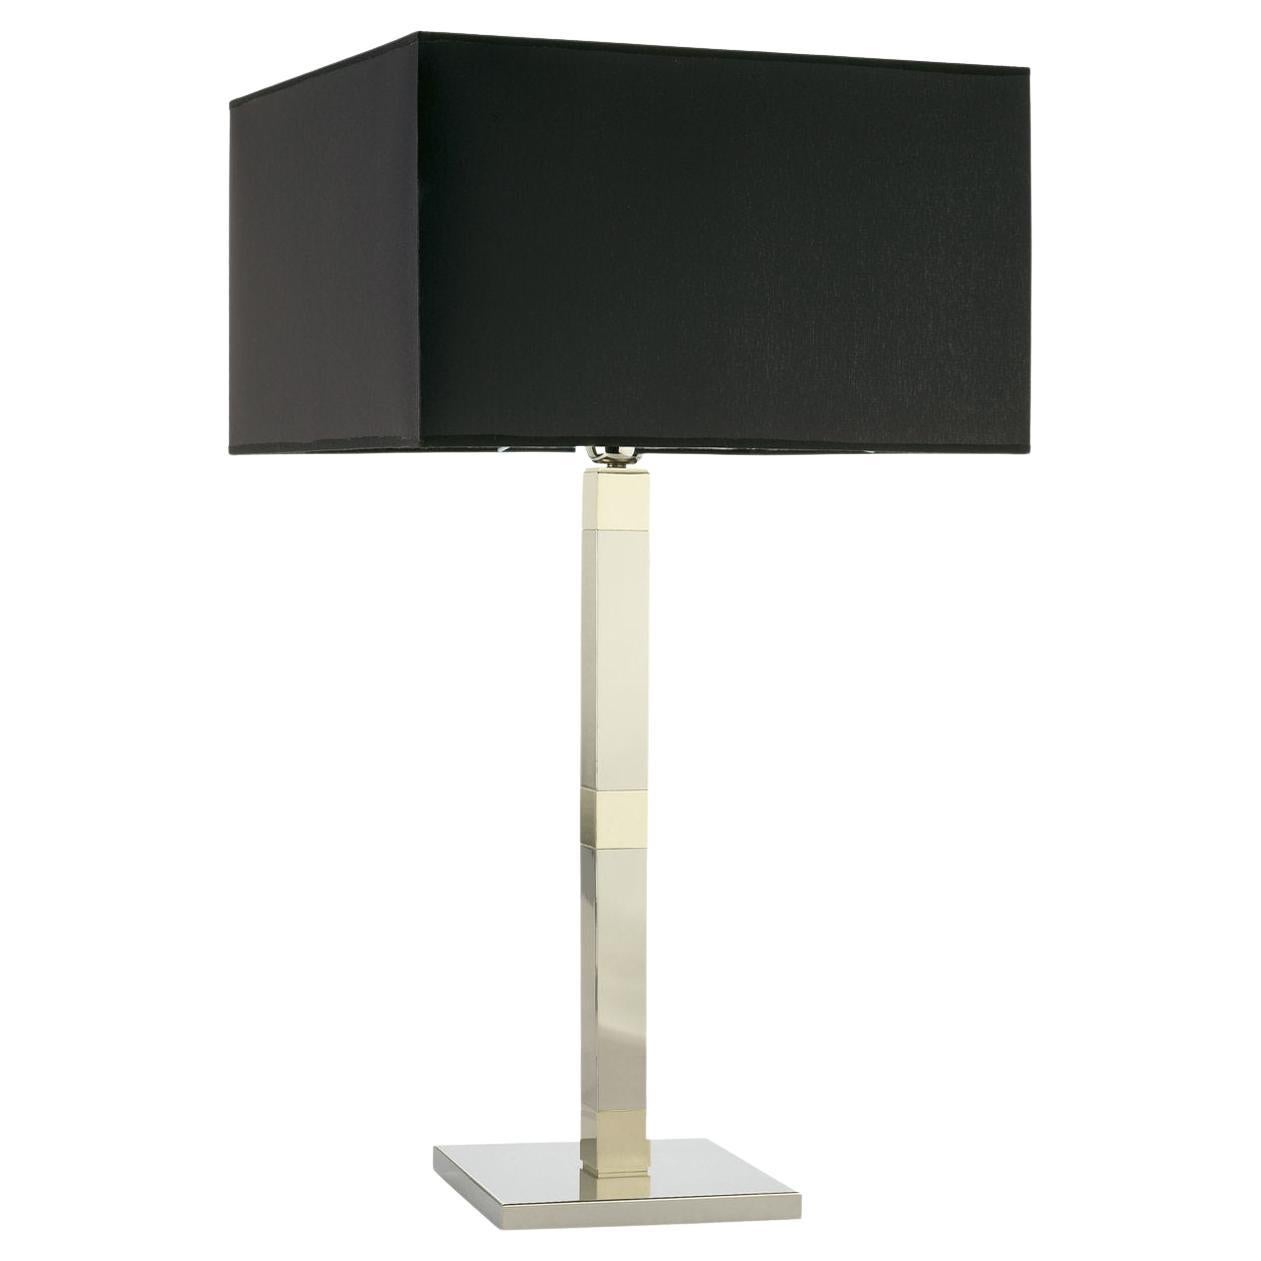 Libra Desk Lamp with Gold